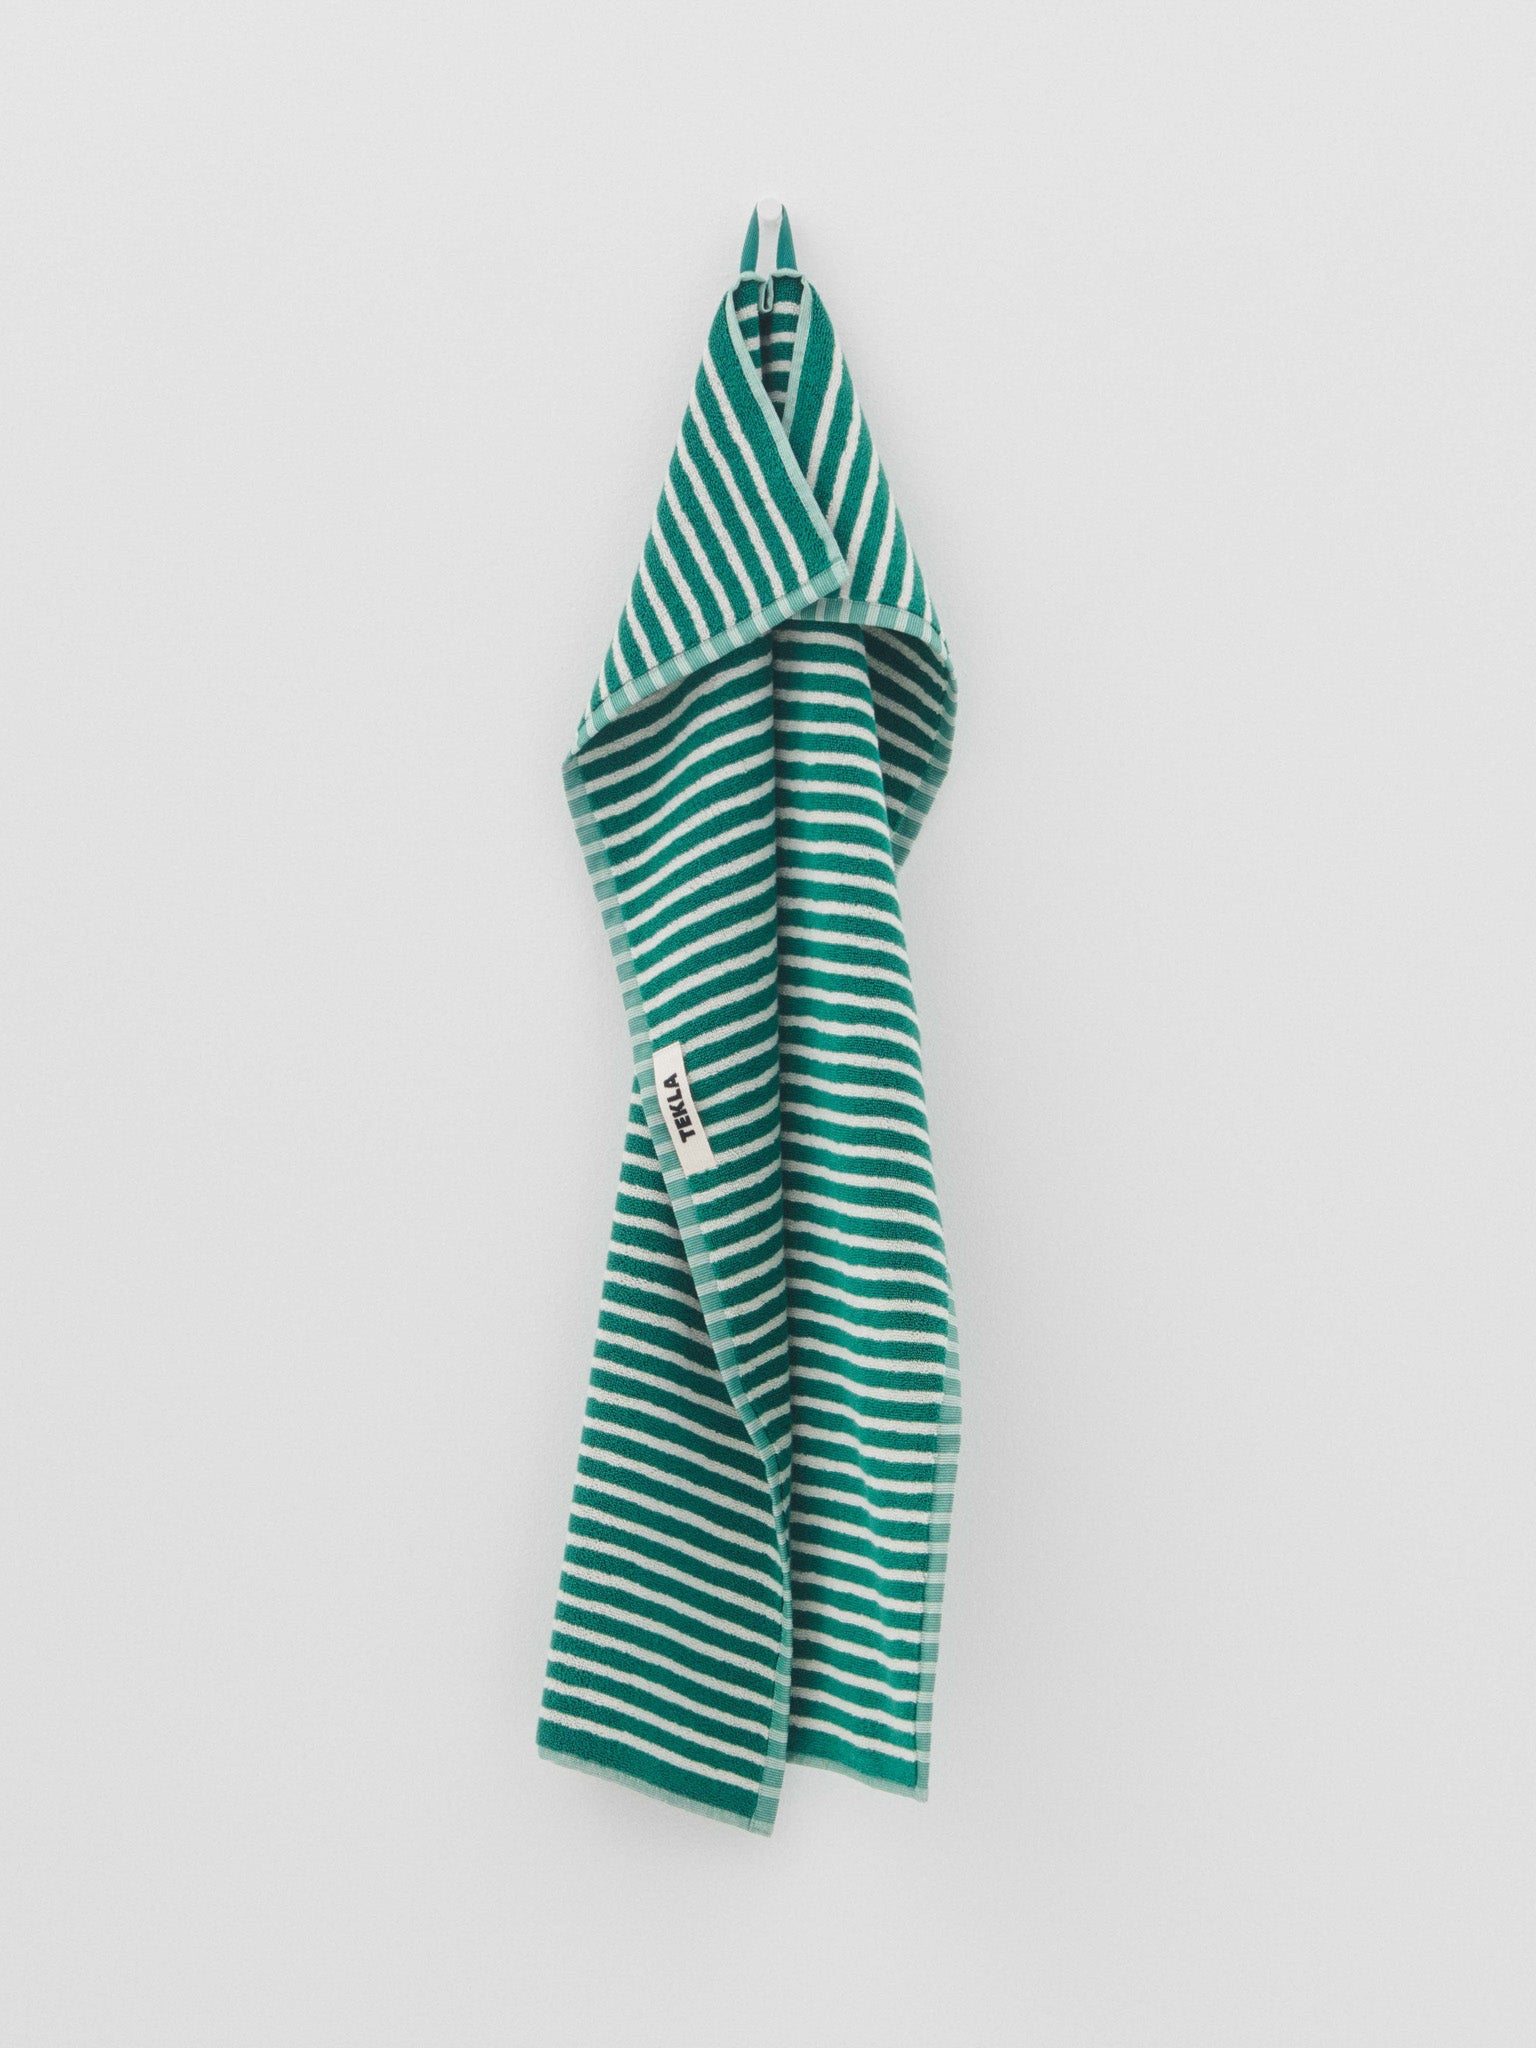 Hand Towel in Teal Green Stripes